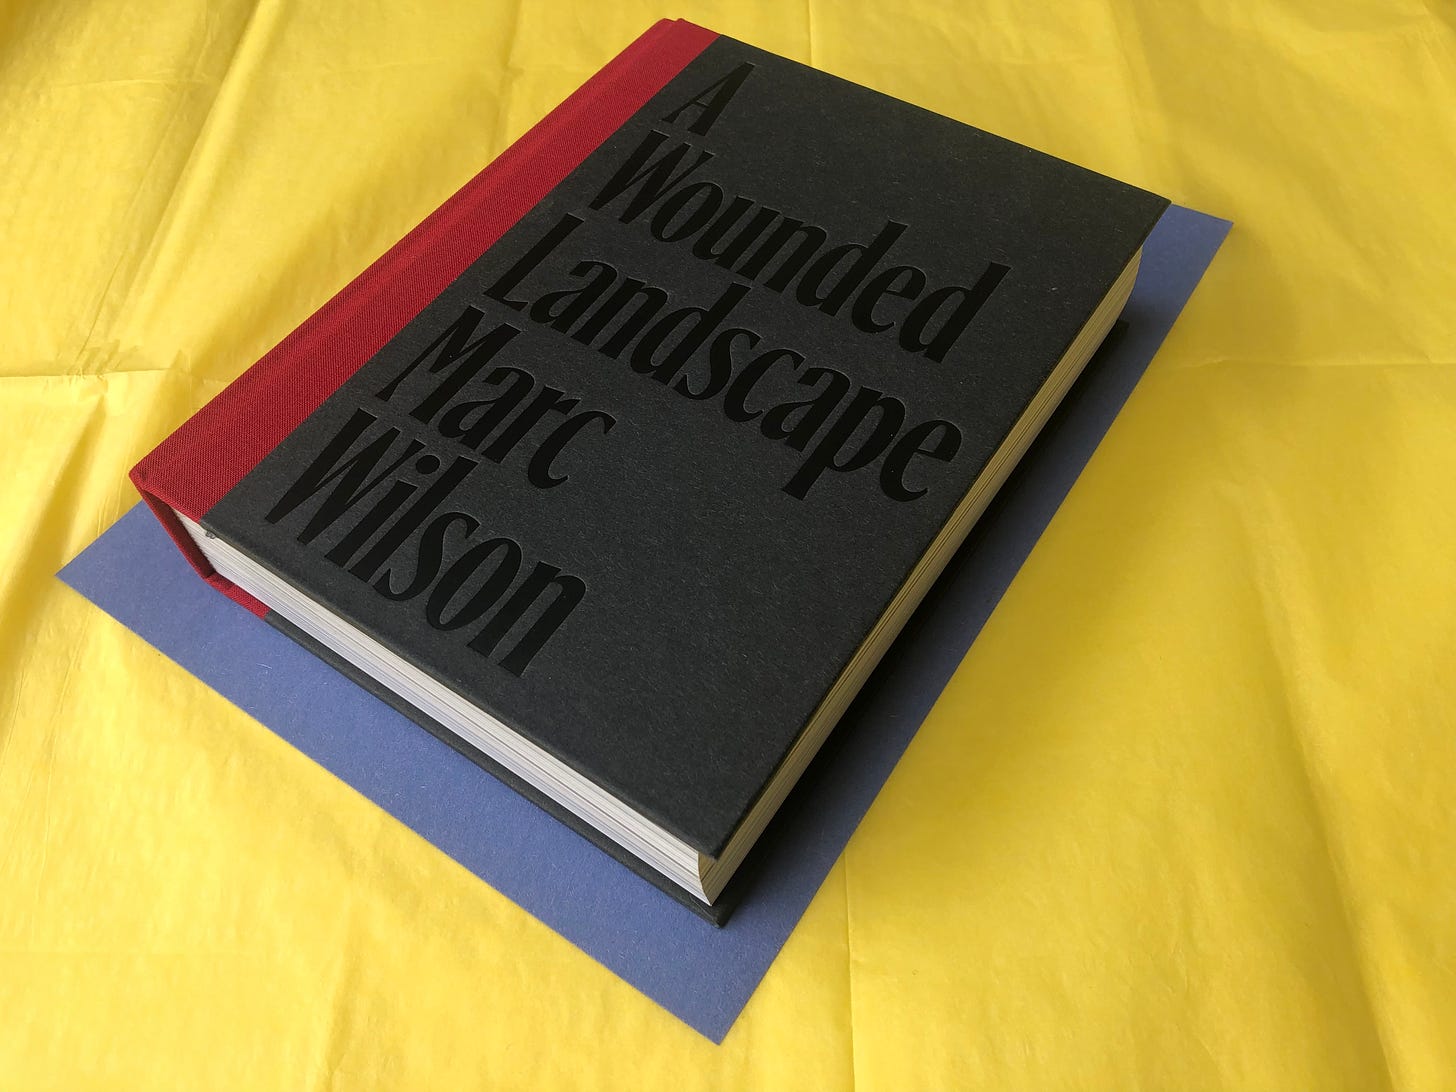 Thick book, red spine, grey cover with A Wounded Landscape Marc Wilson in large letters, each word on a line. Book is on blue paper with yellow tissue underneath